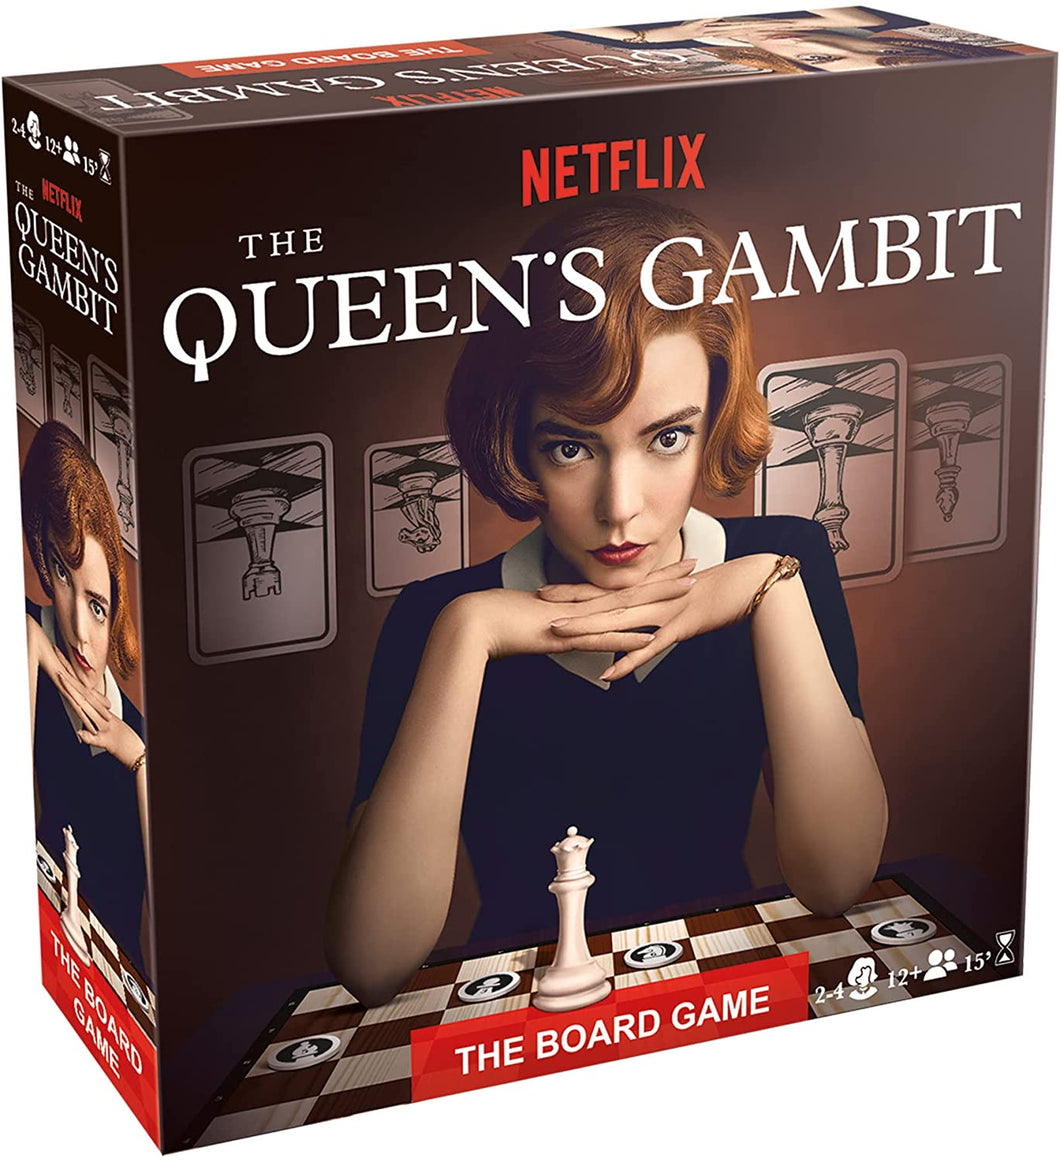 THE QUEEN'S GAMBIT - The Board Game